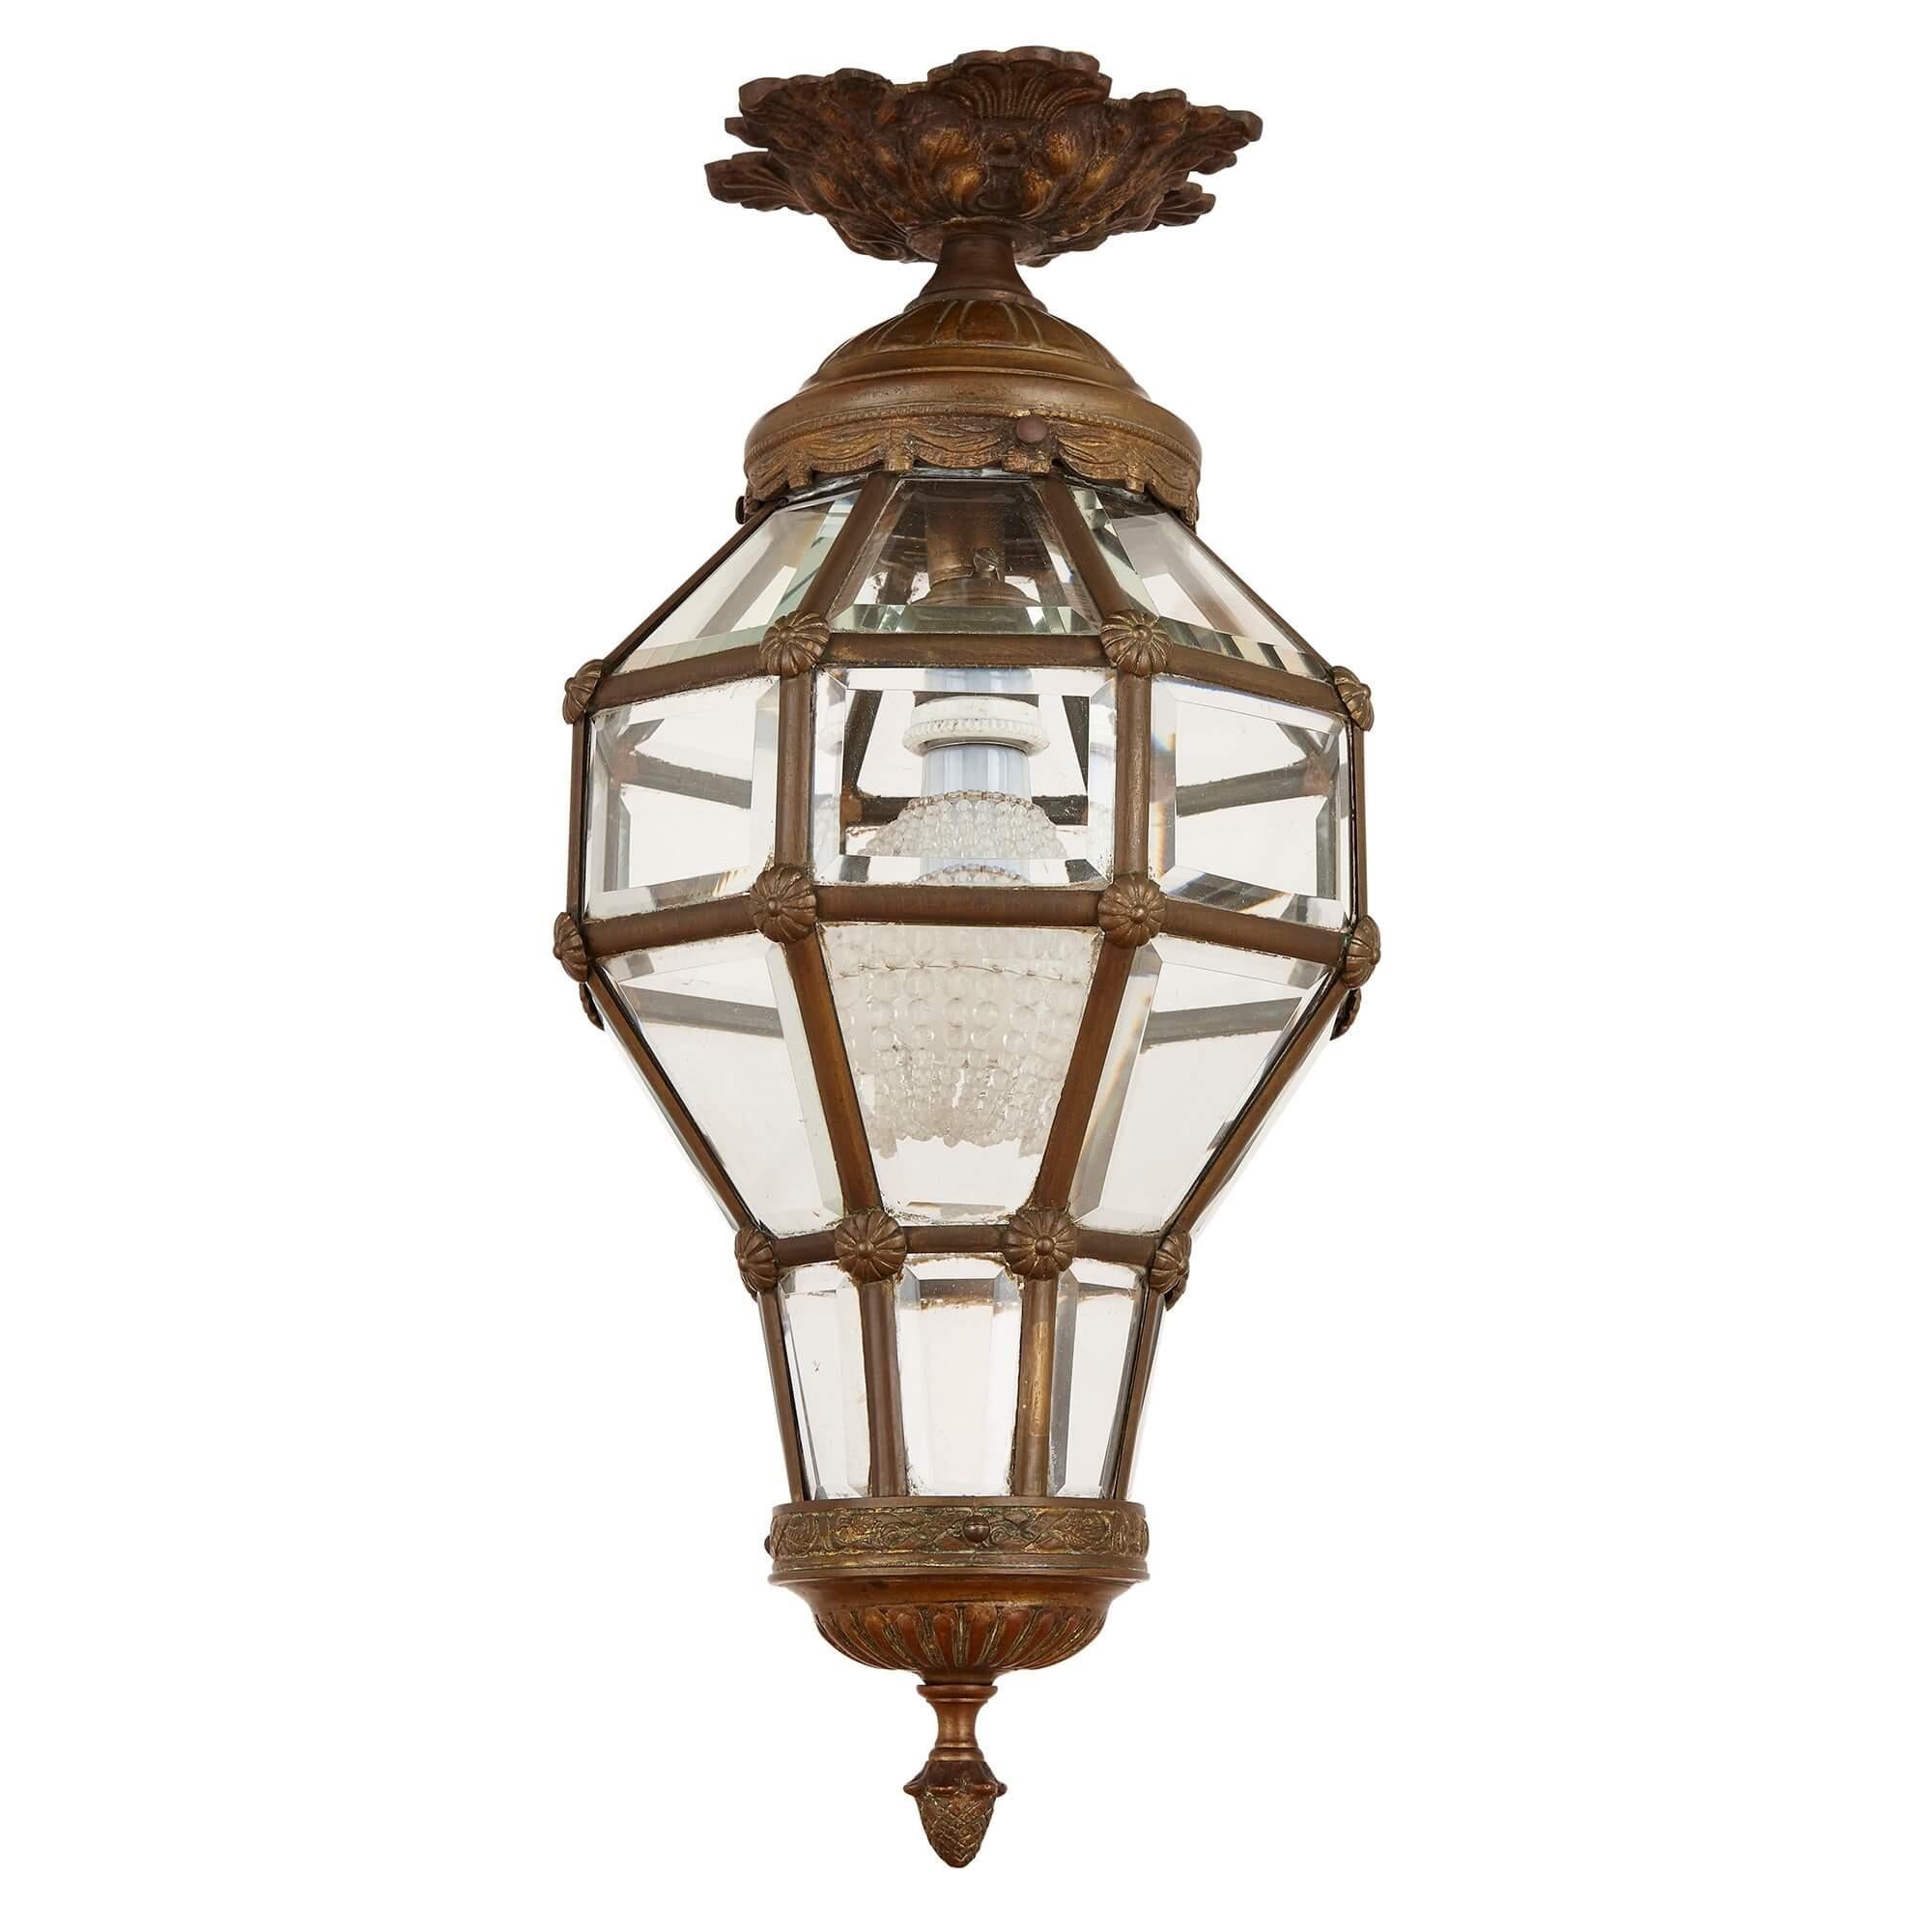 Antique Neoclassical style glass and gilt bronze lantern,
French, late 19th century
Measures: Height 46cm, diameter 21cm

This fine, antique lantern was made after an 18th century model for the Chateau of Versailles, and takes the octagonal